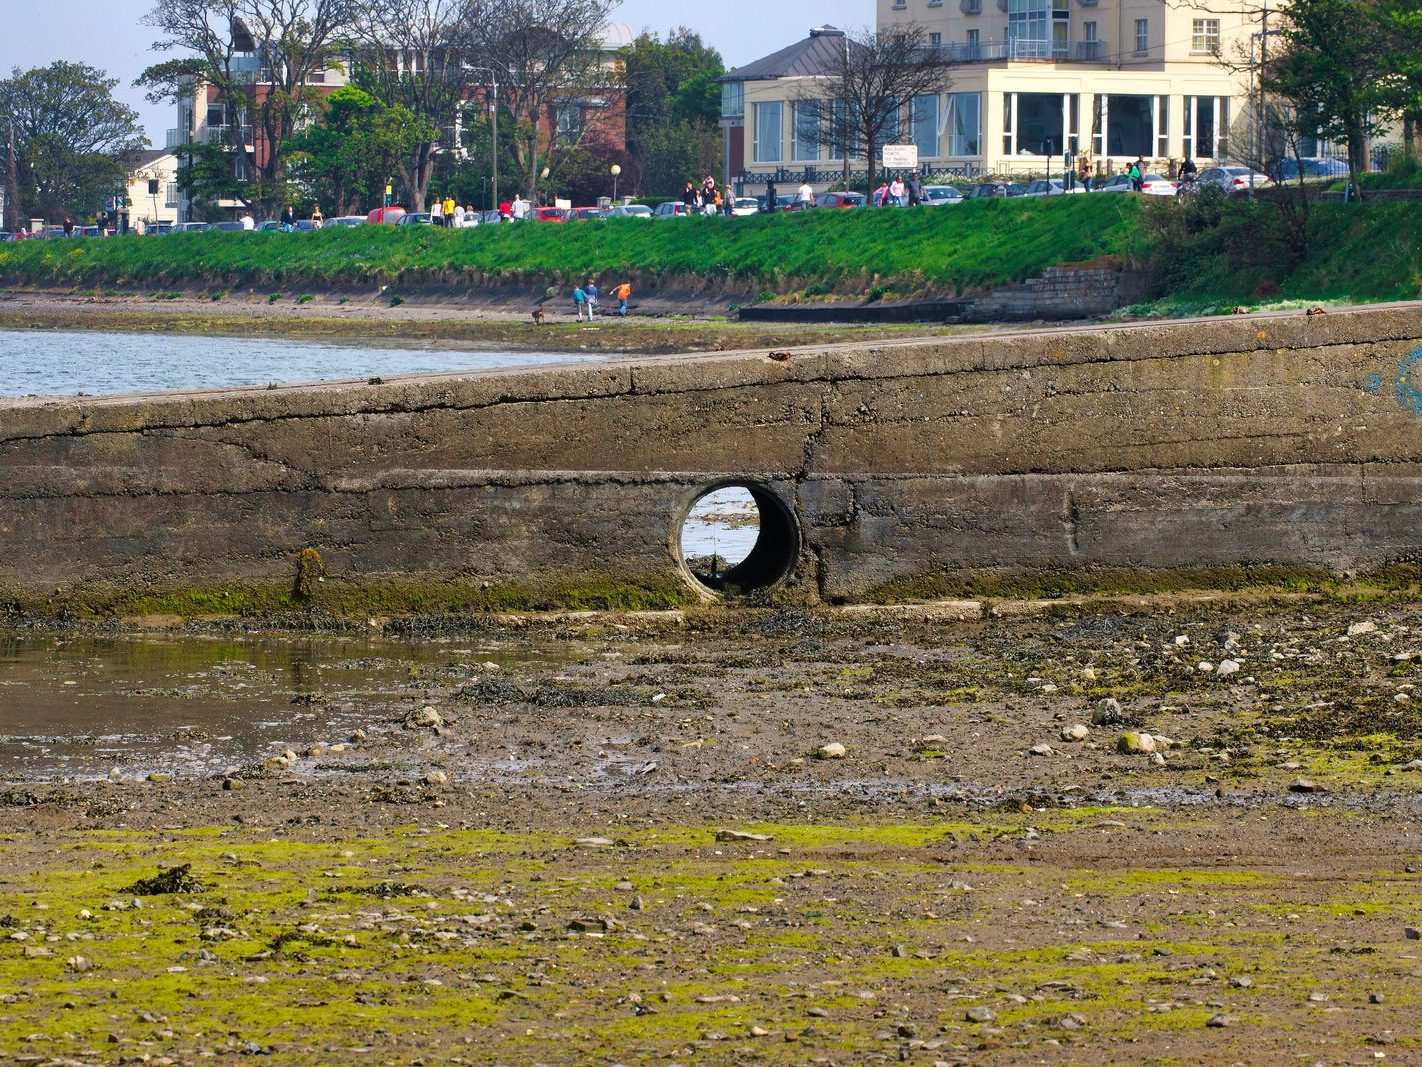 MALAHIDE SEAFRONT IN 2008 NEAREST THE TOWN OR THE LESS ATTRACTIVE SECTION 008